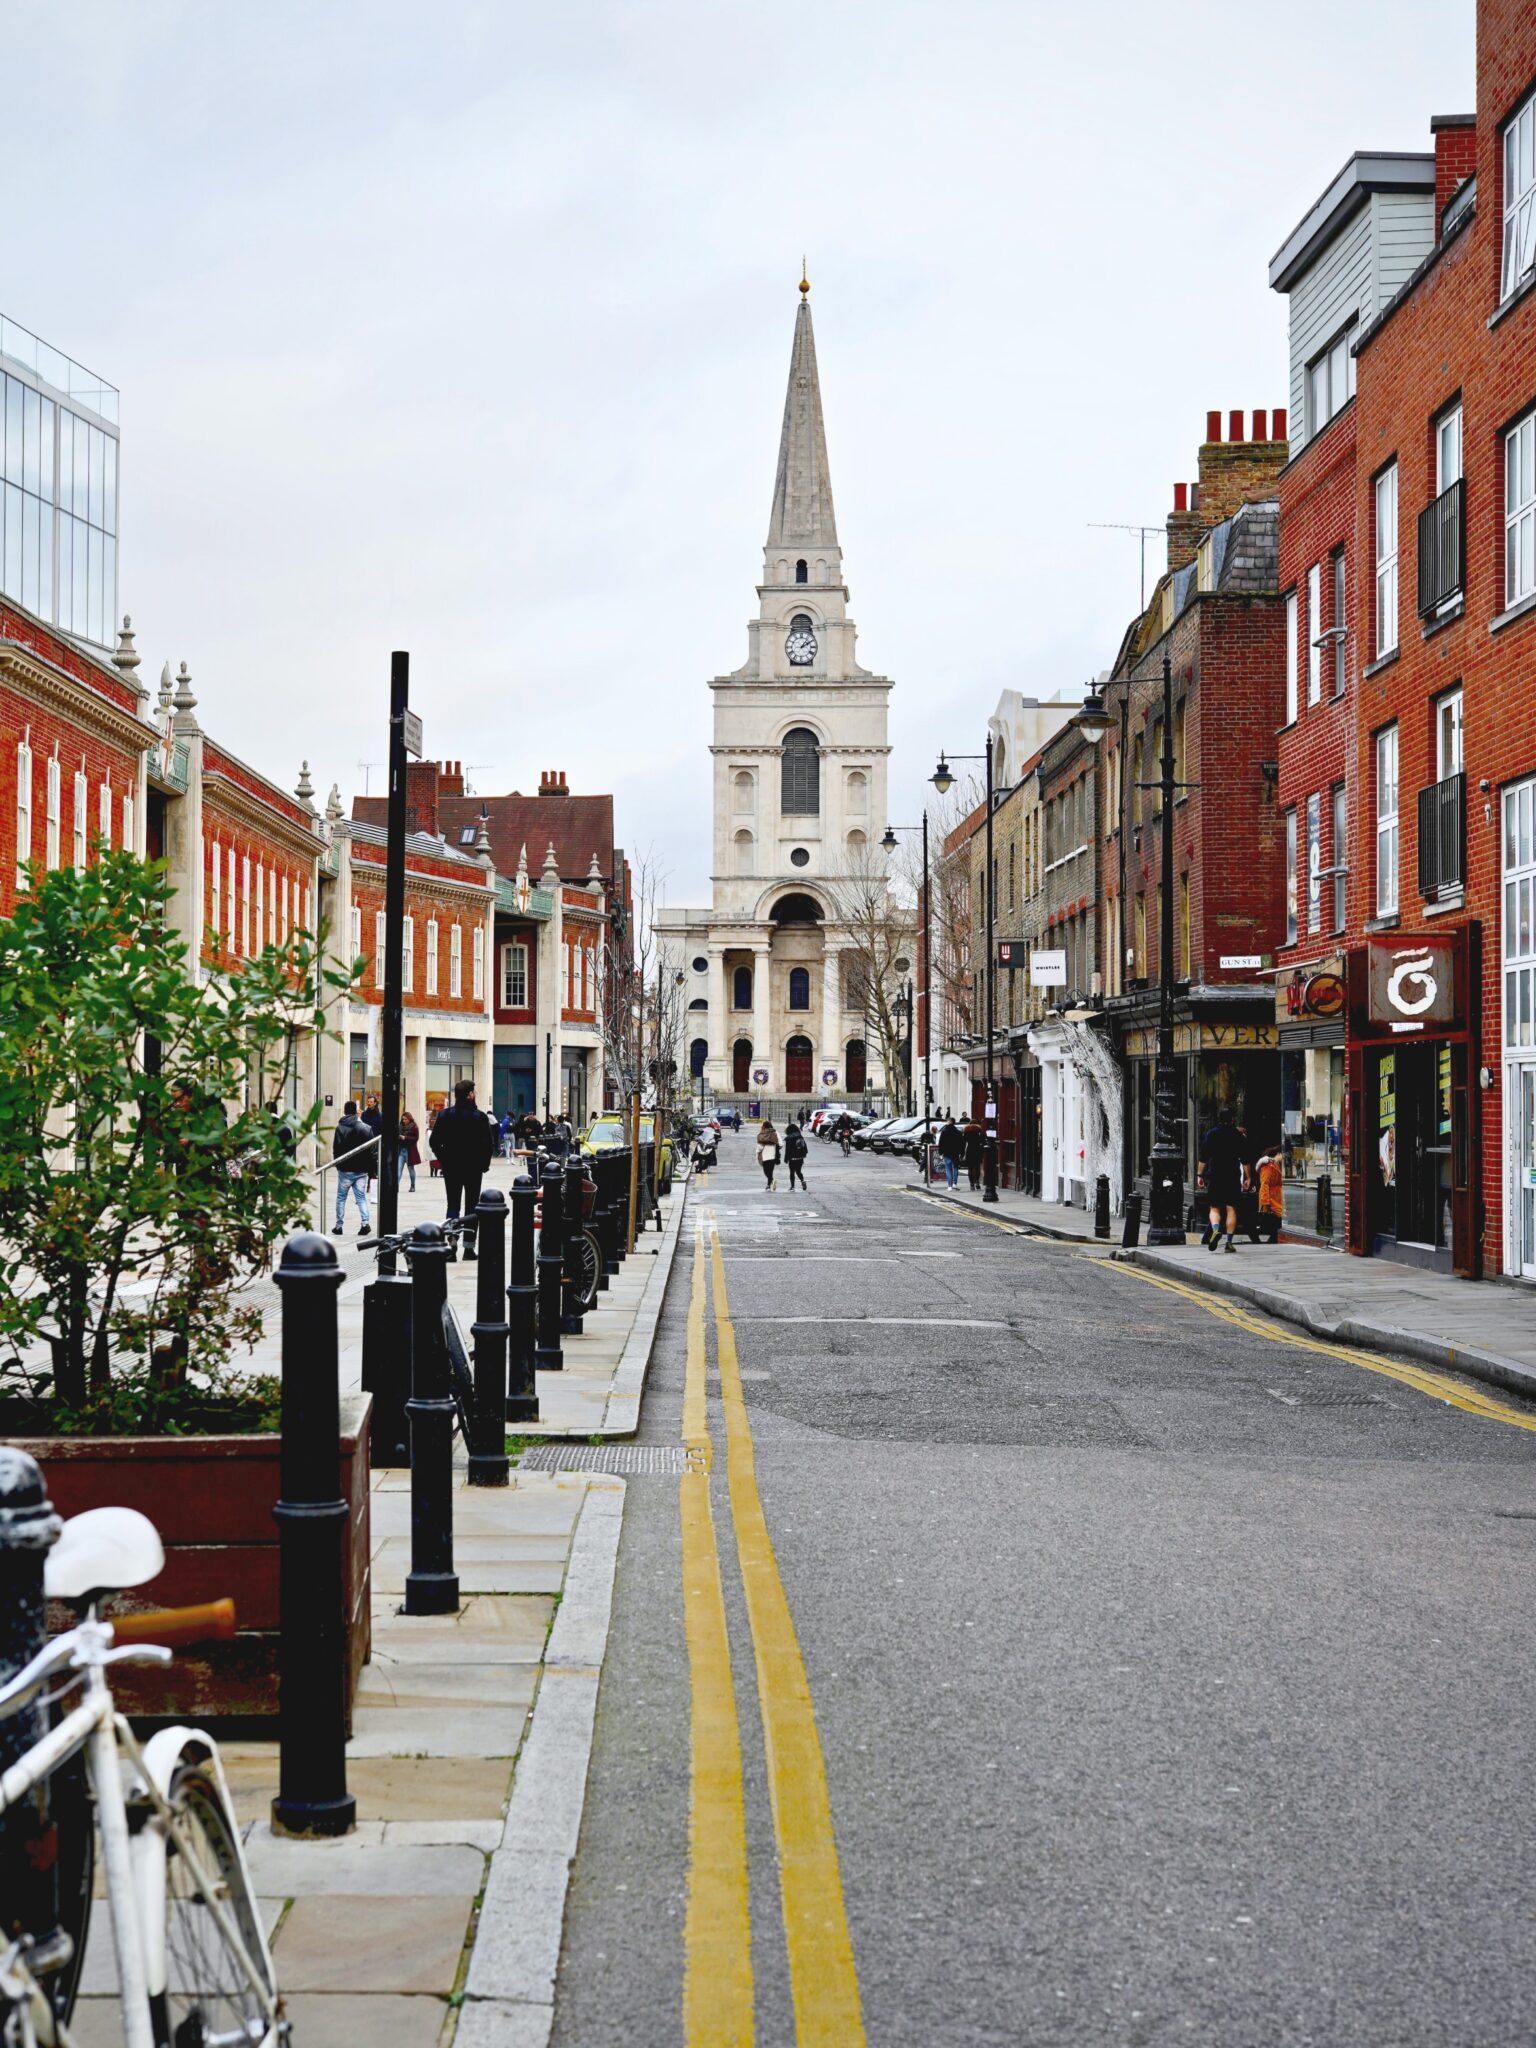 An empty London, England street. Shows a beautiful church and historical buildings. 